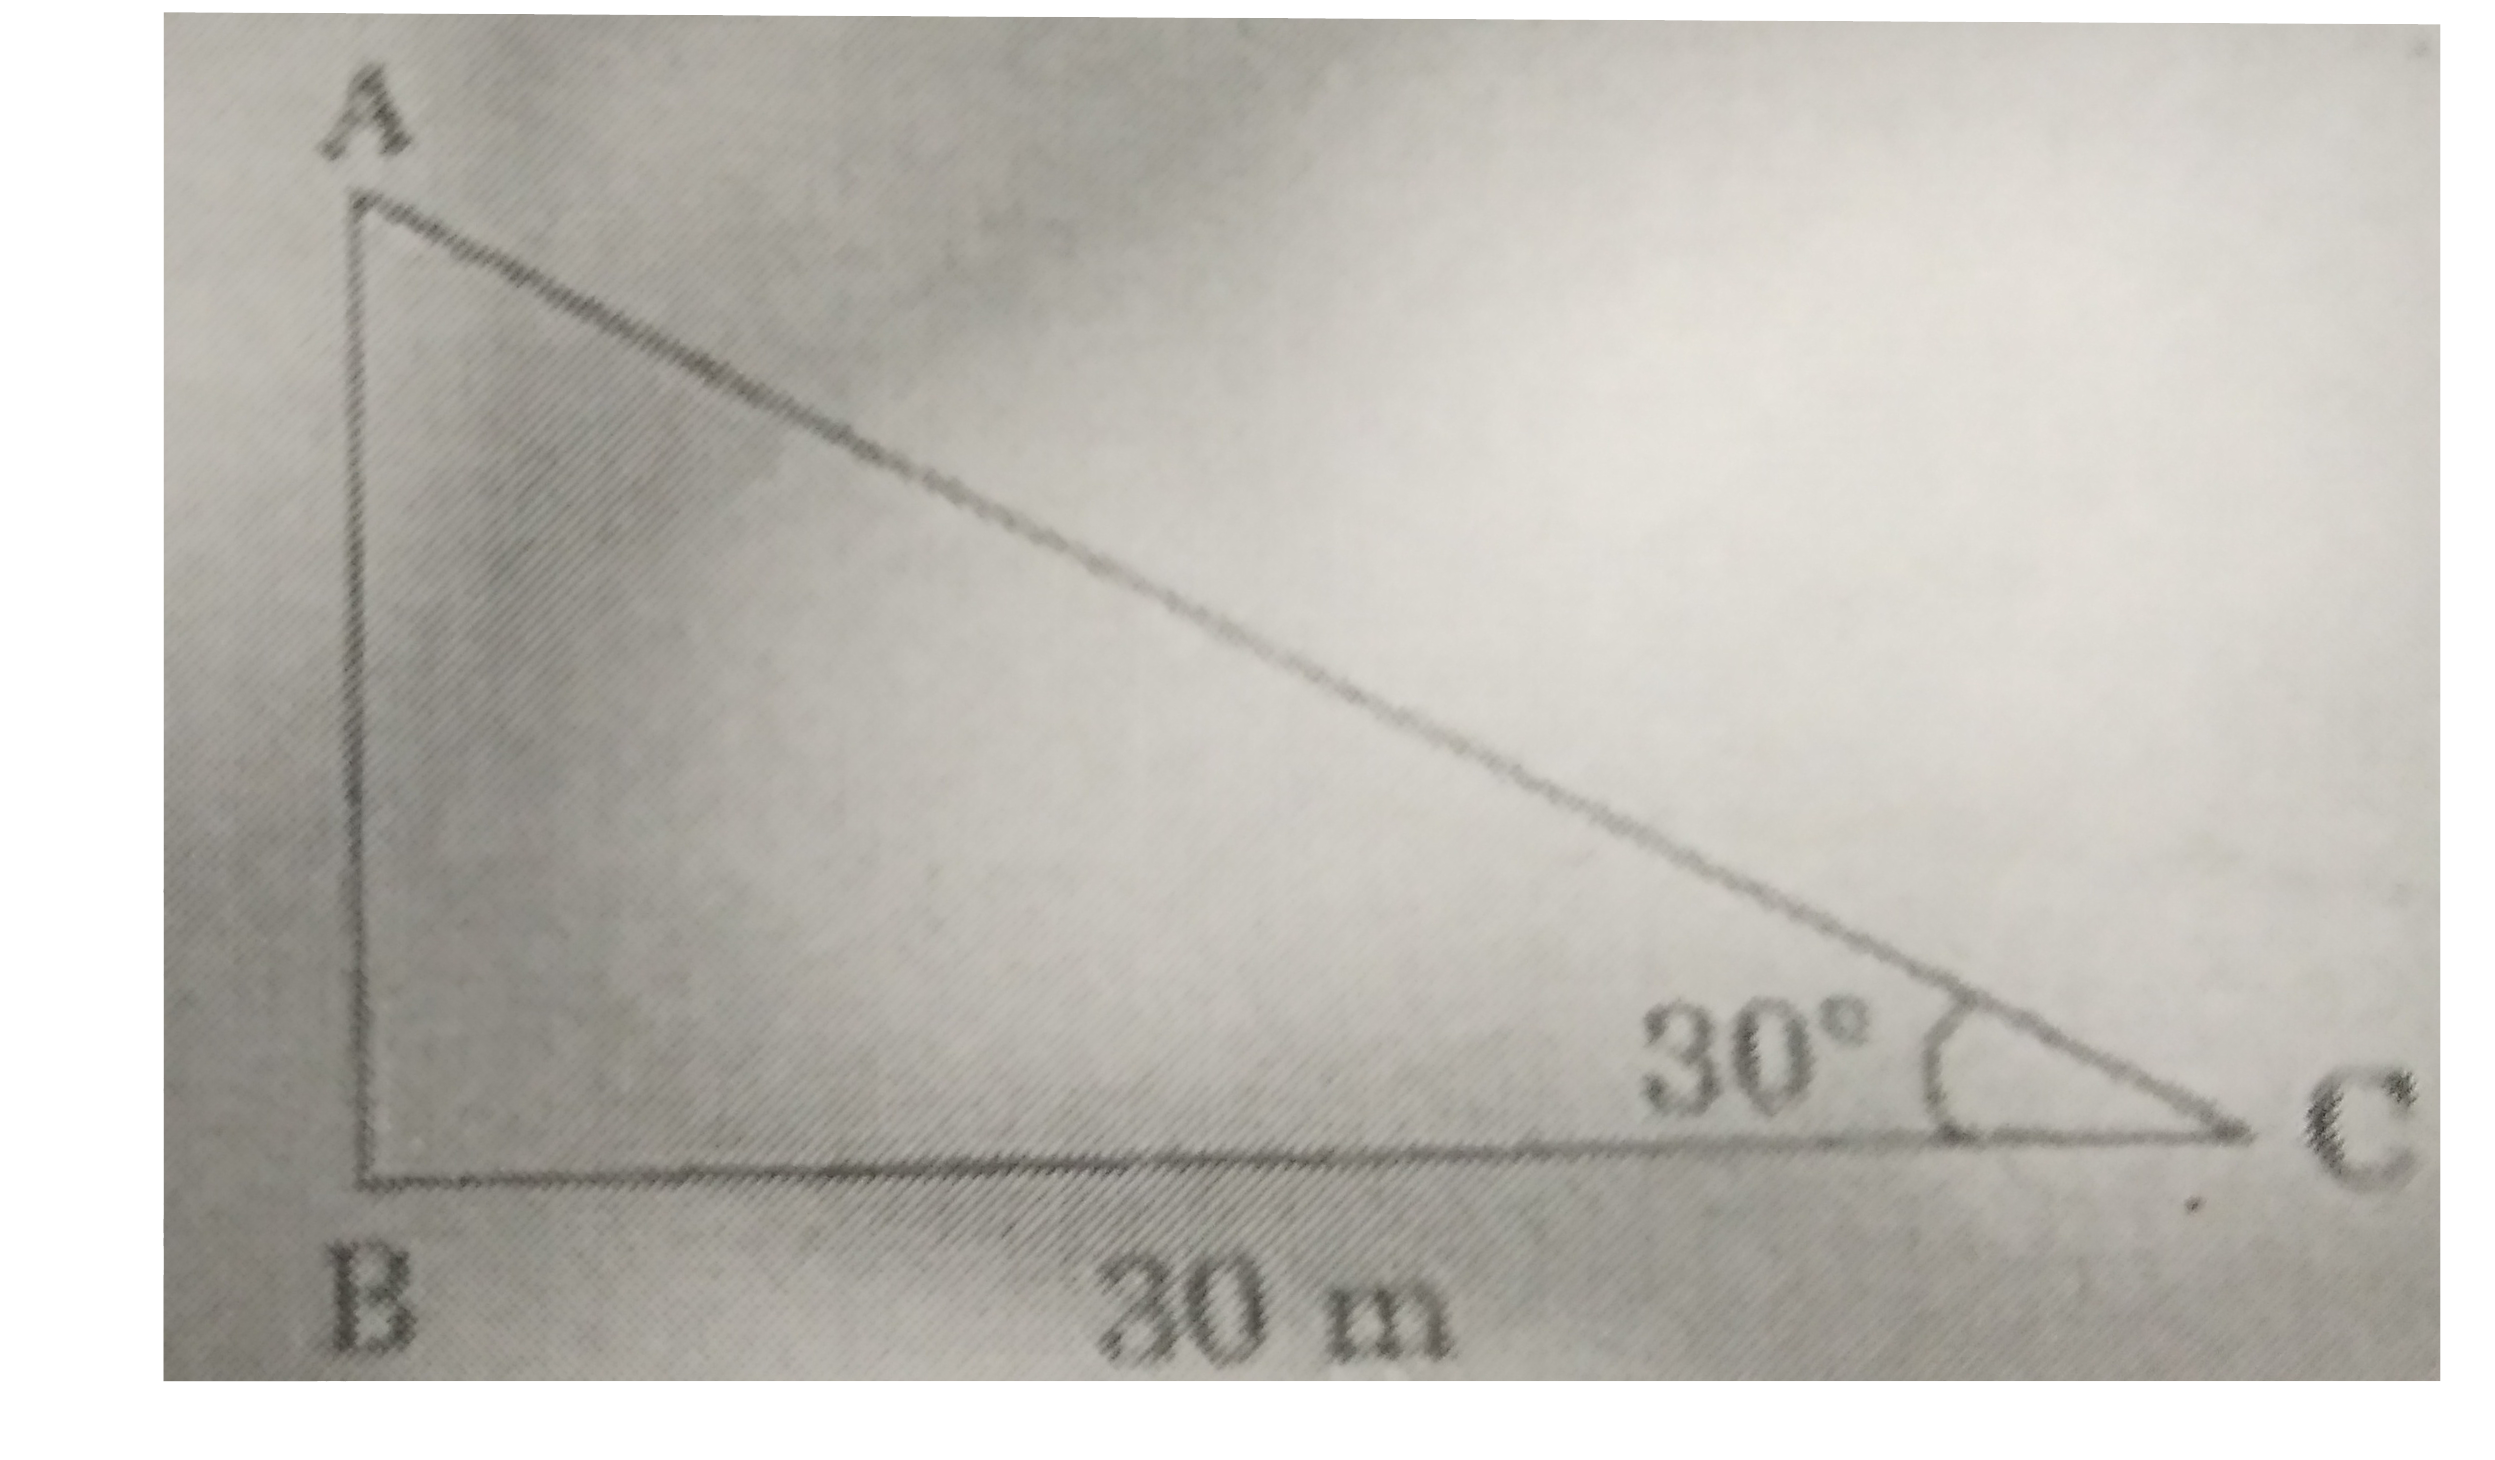 If figure, the angle of elevation of the top of a tower from a point C on the ground which is 30 m away from the foot of the tower, is 30^(@). Find th height of the tower.